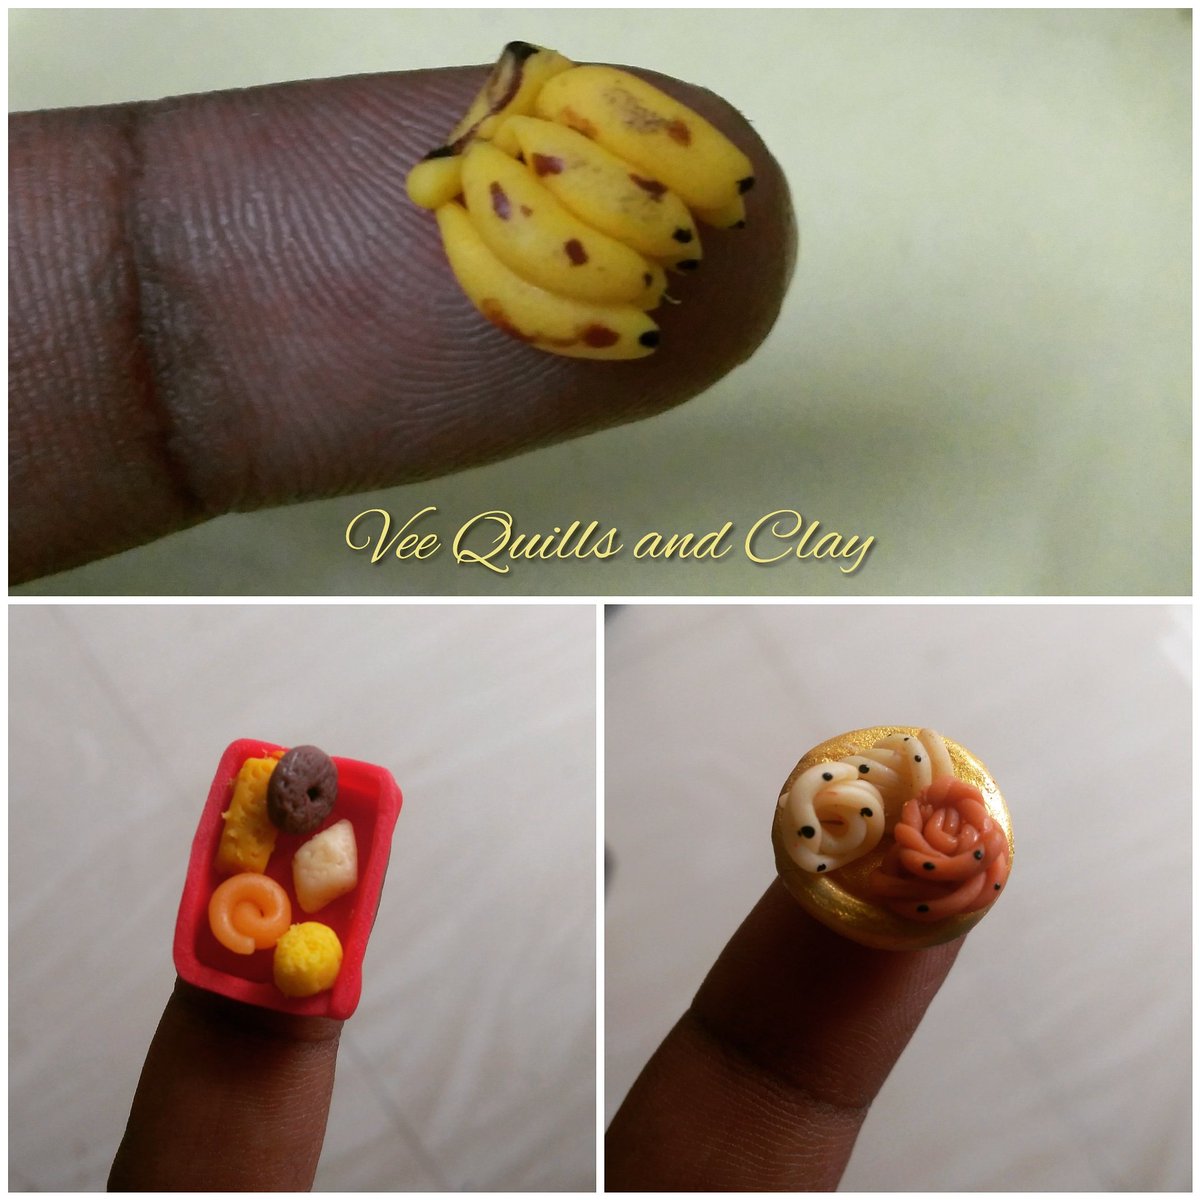 Some trials with miniatures!
#coldporcelainclay #airdryclay #handcrafted #handmade #miniature #fakefood #miniaturefood